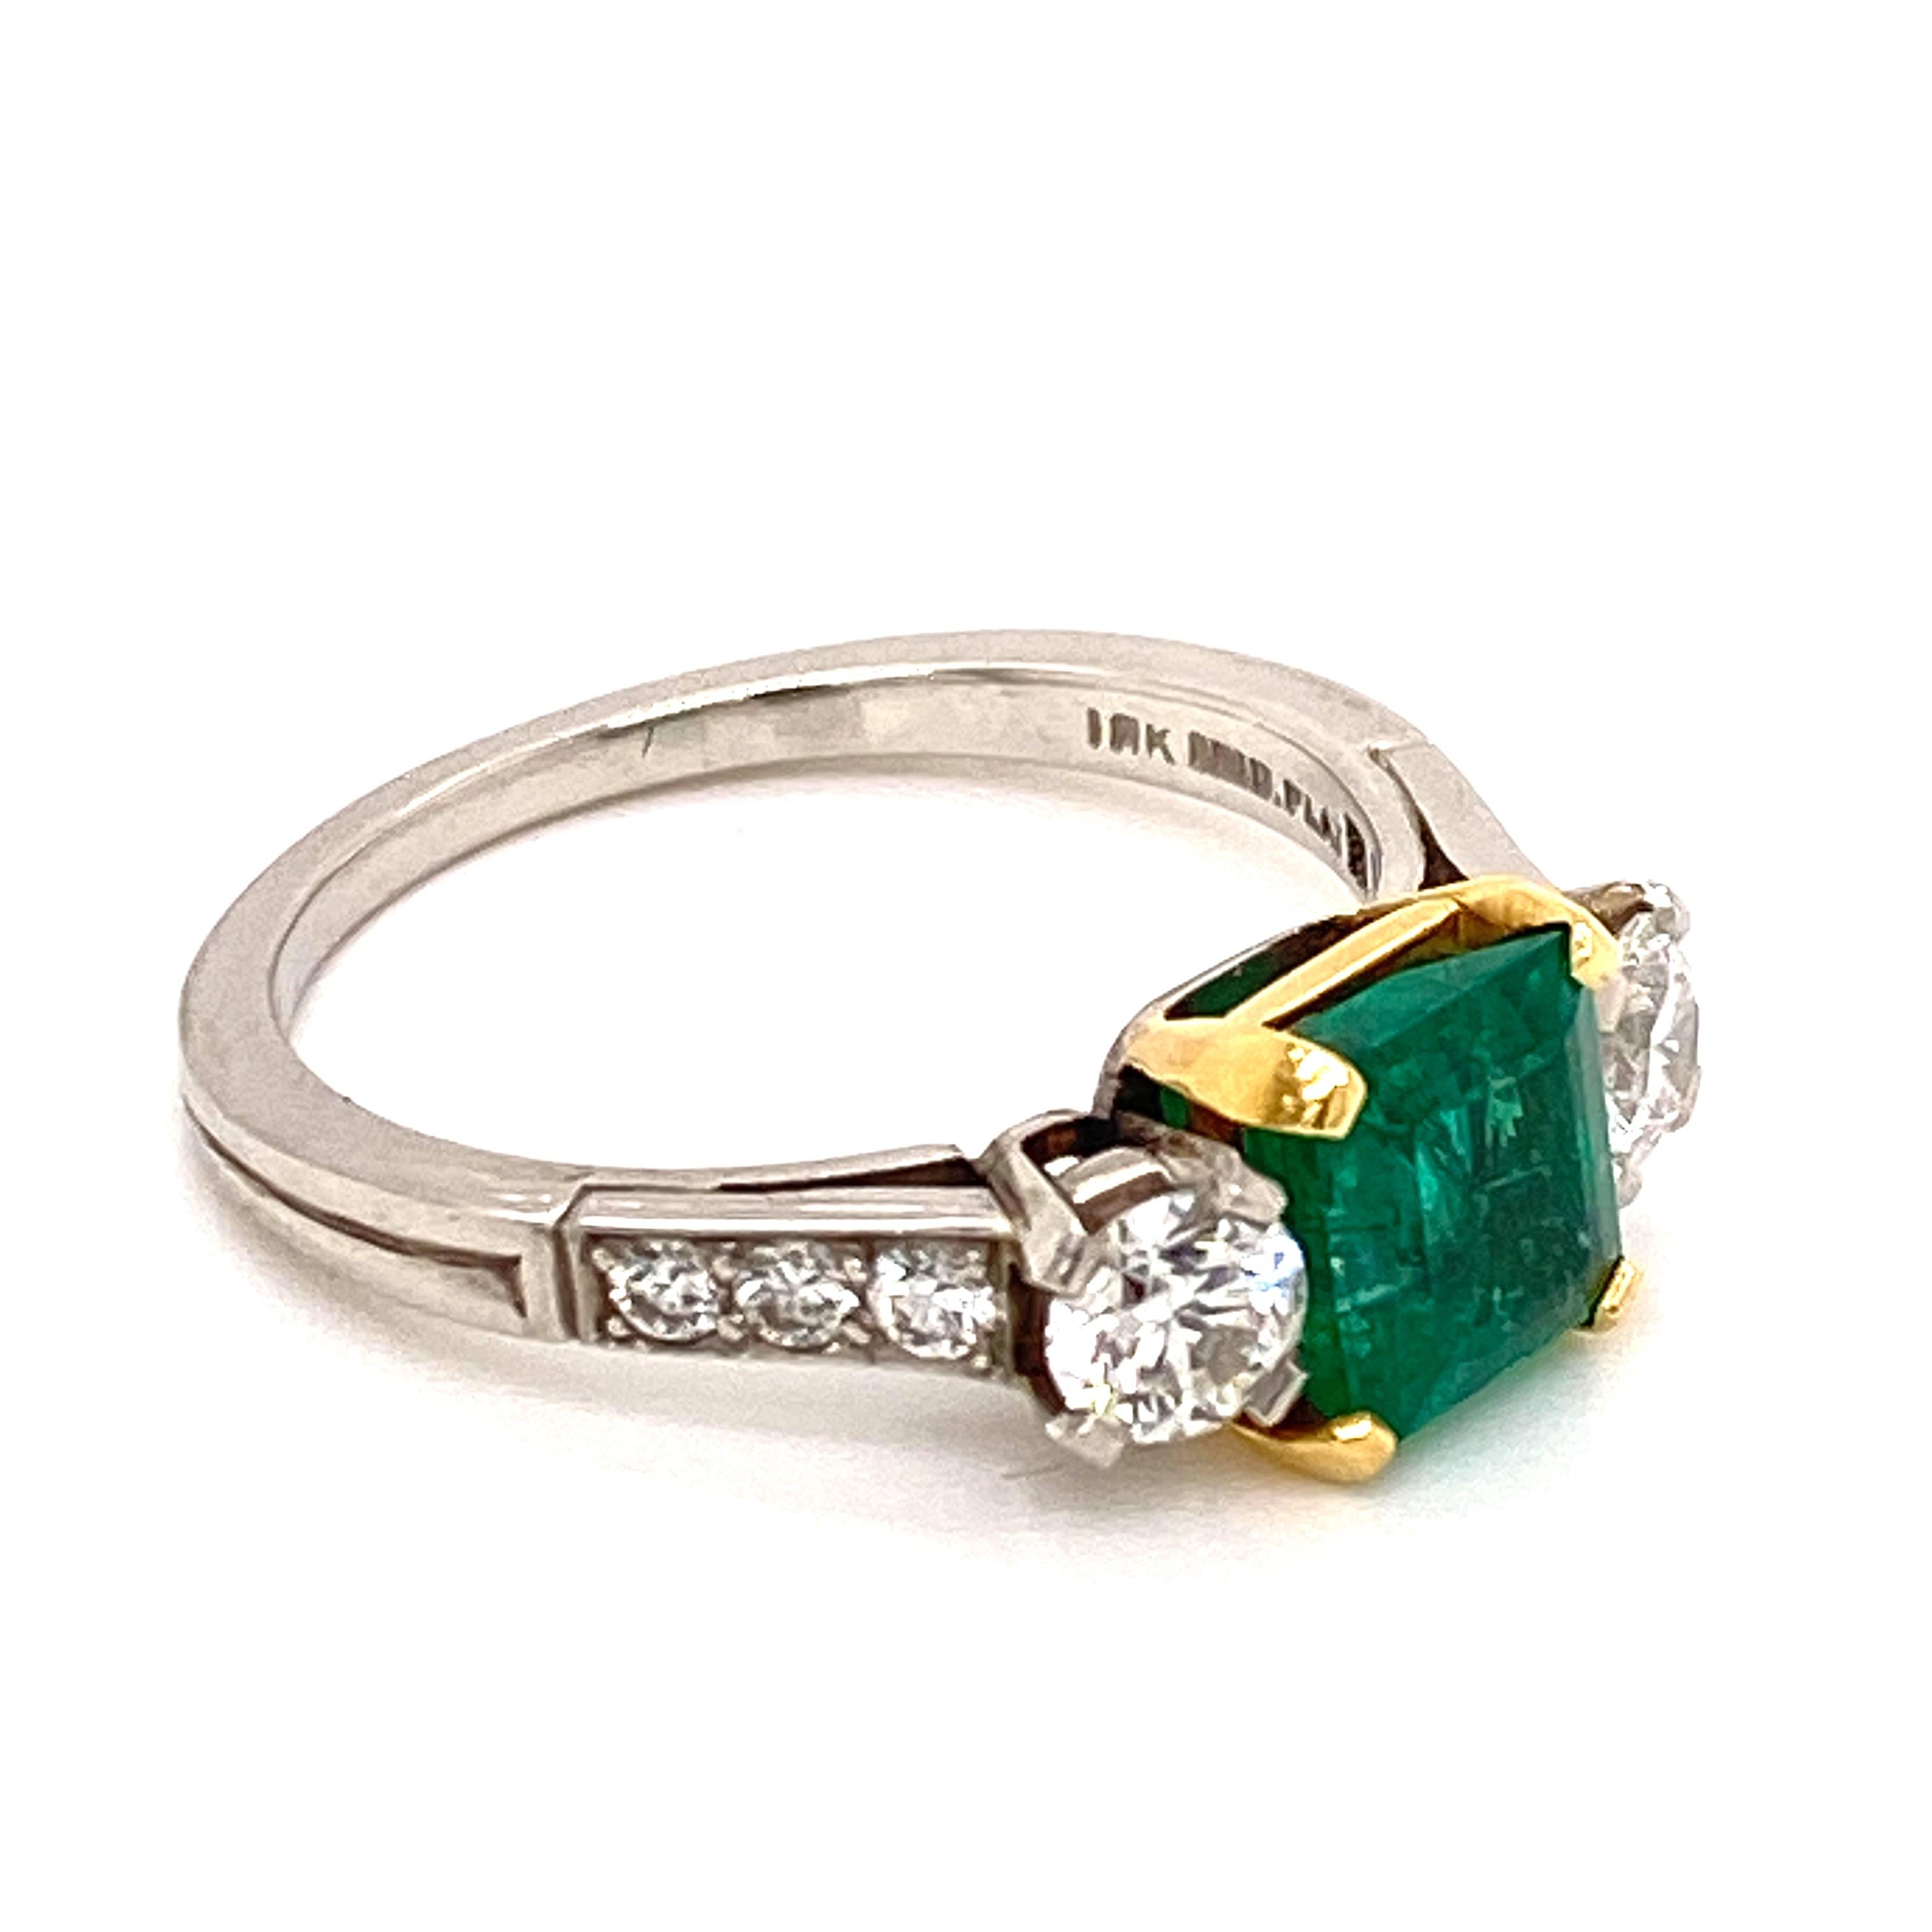 Gorgeous bright green emerald ring crafted by Tiffany & Company. This estate ring features a 1.06 carat Brazilian emerald with an AGL Certificate. The square emerald is flanked by 8 round brilliant cut diamonds (1.00 carat total weight) graded F